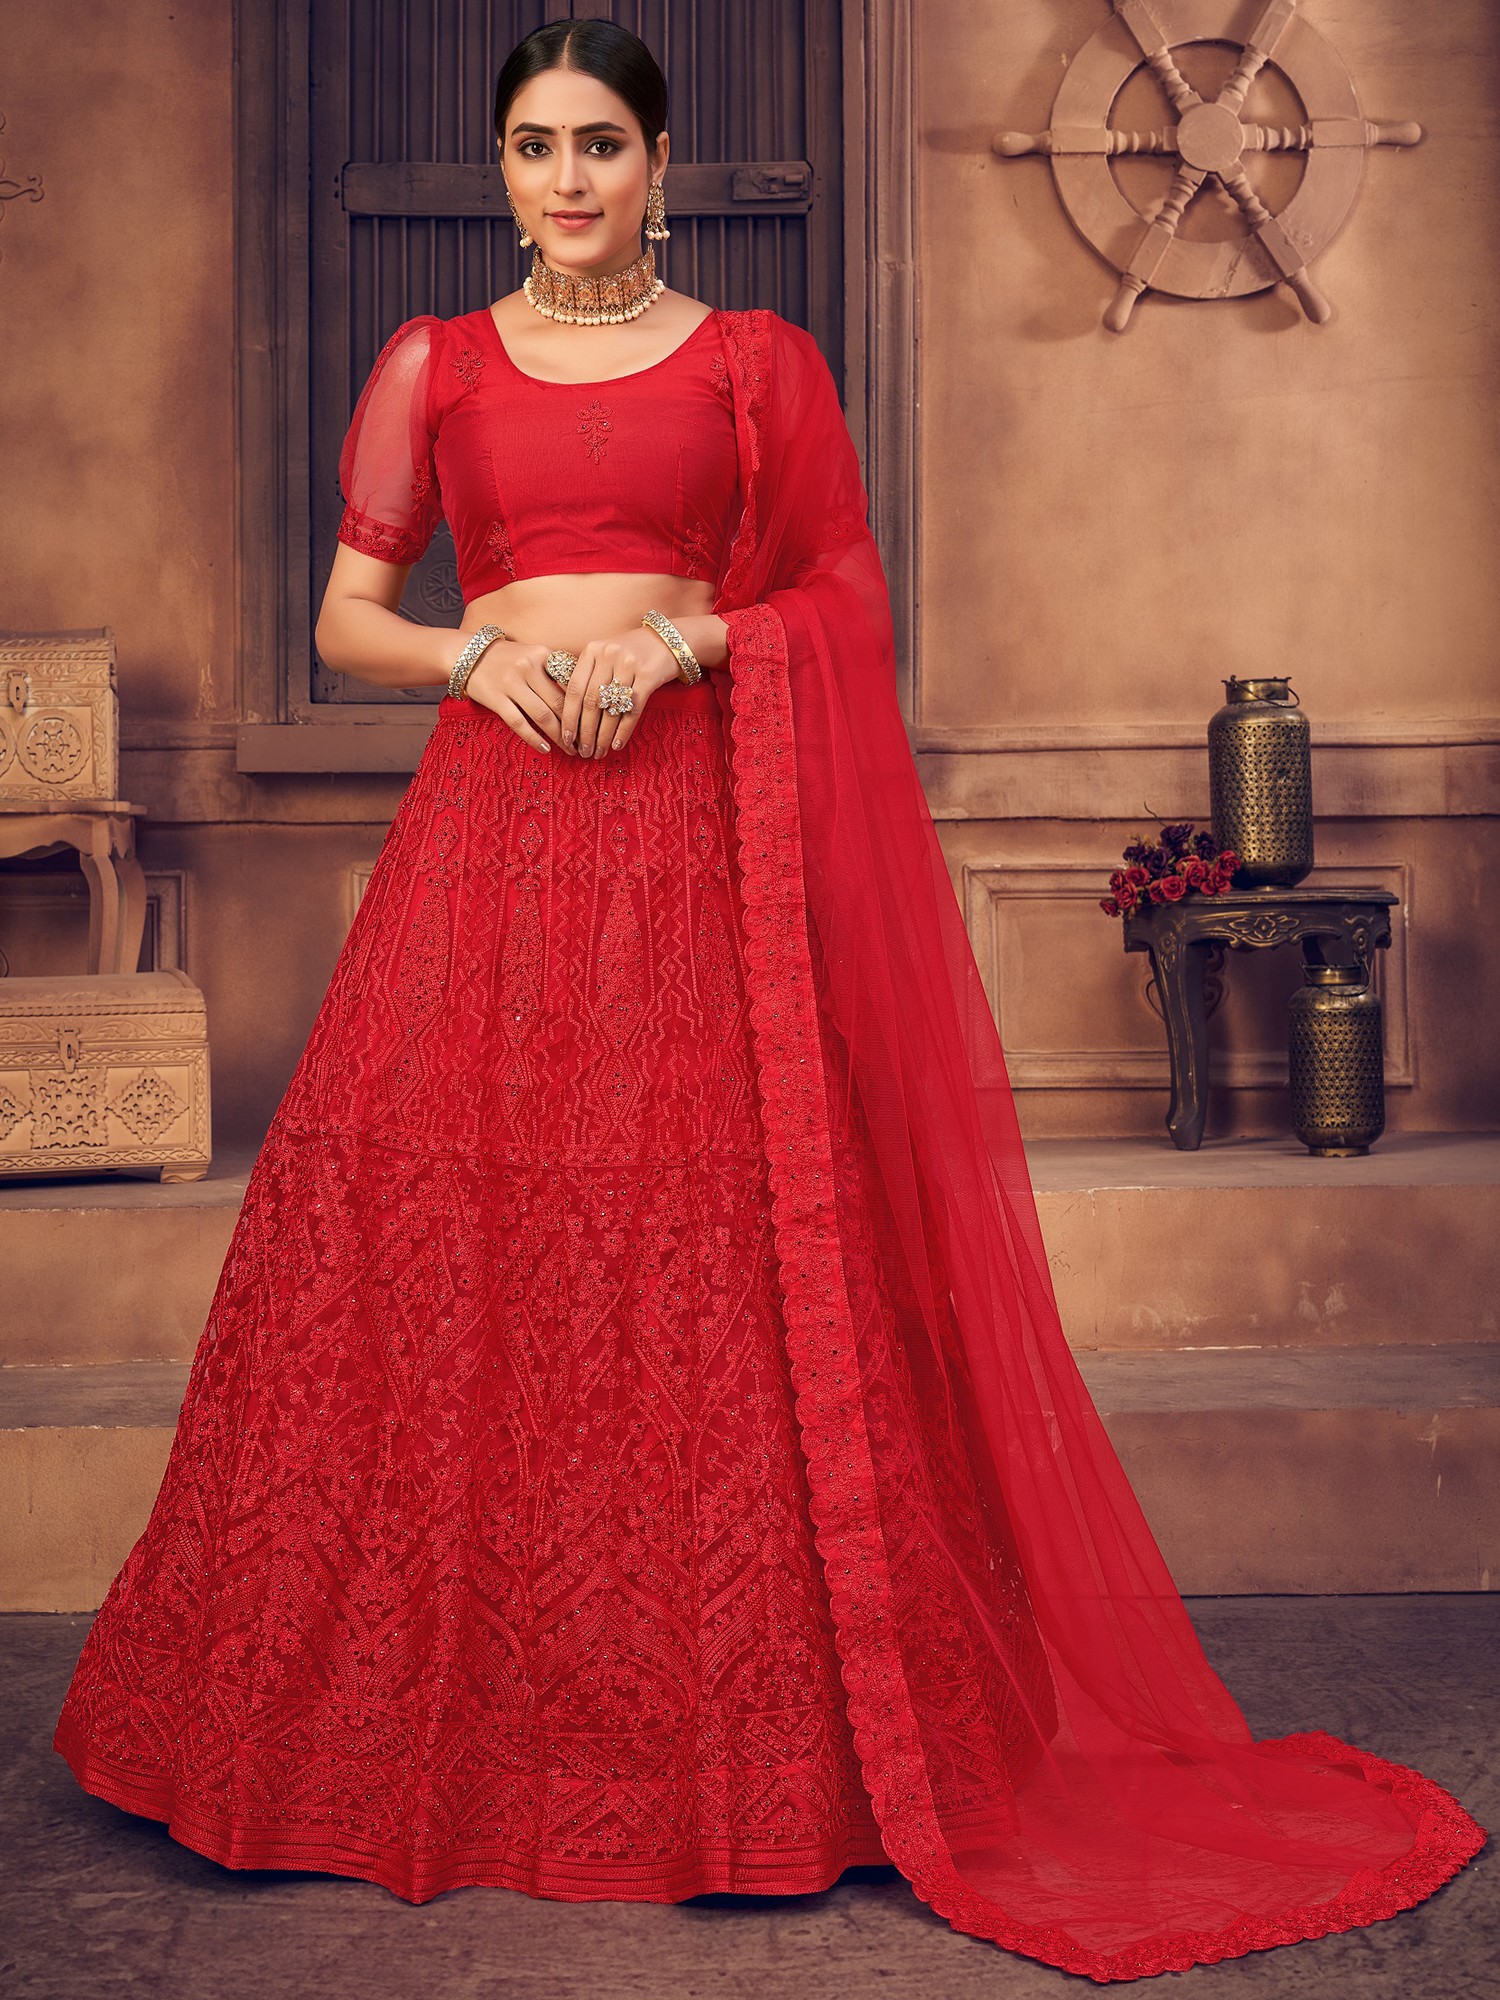 Tomato-Red Net Designer Lehenga Choli With All-Over Thread-Pearl Embroidery  And Scalloped Dupatta | Exotic India Art